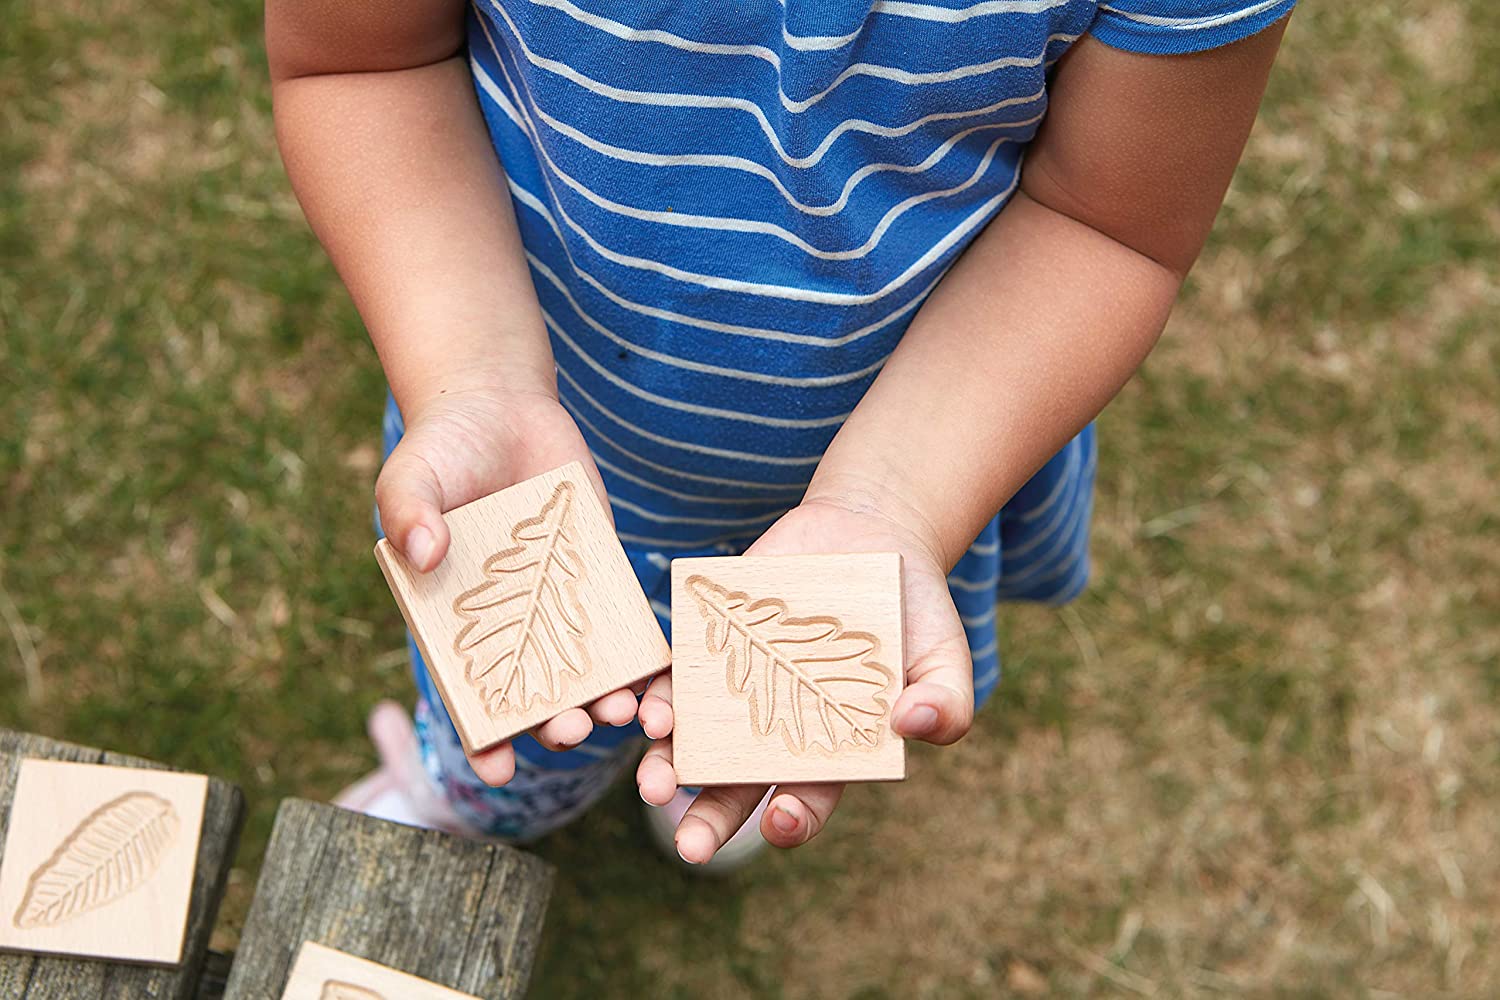 Wooden Leaf Tiles | Learning and Exploring Through Play